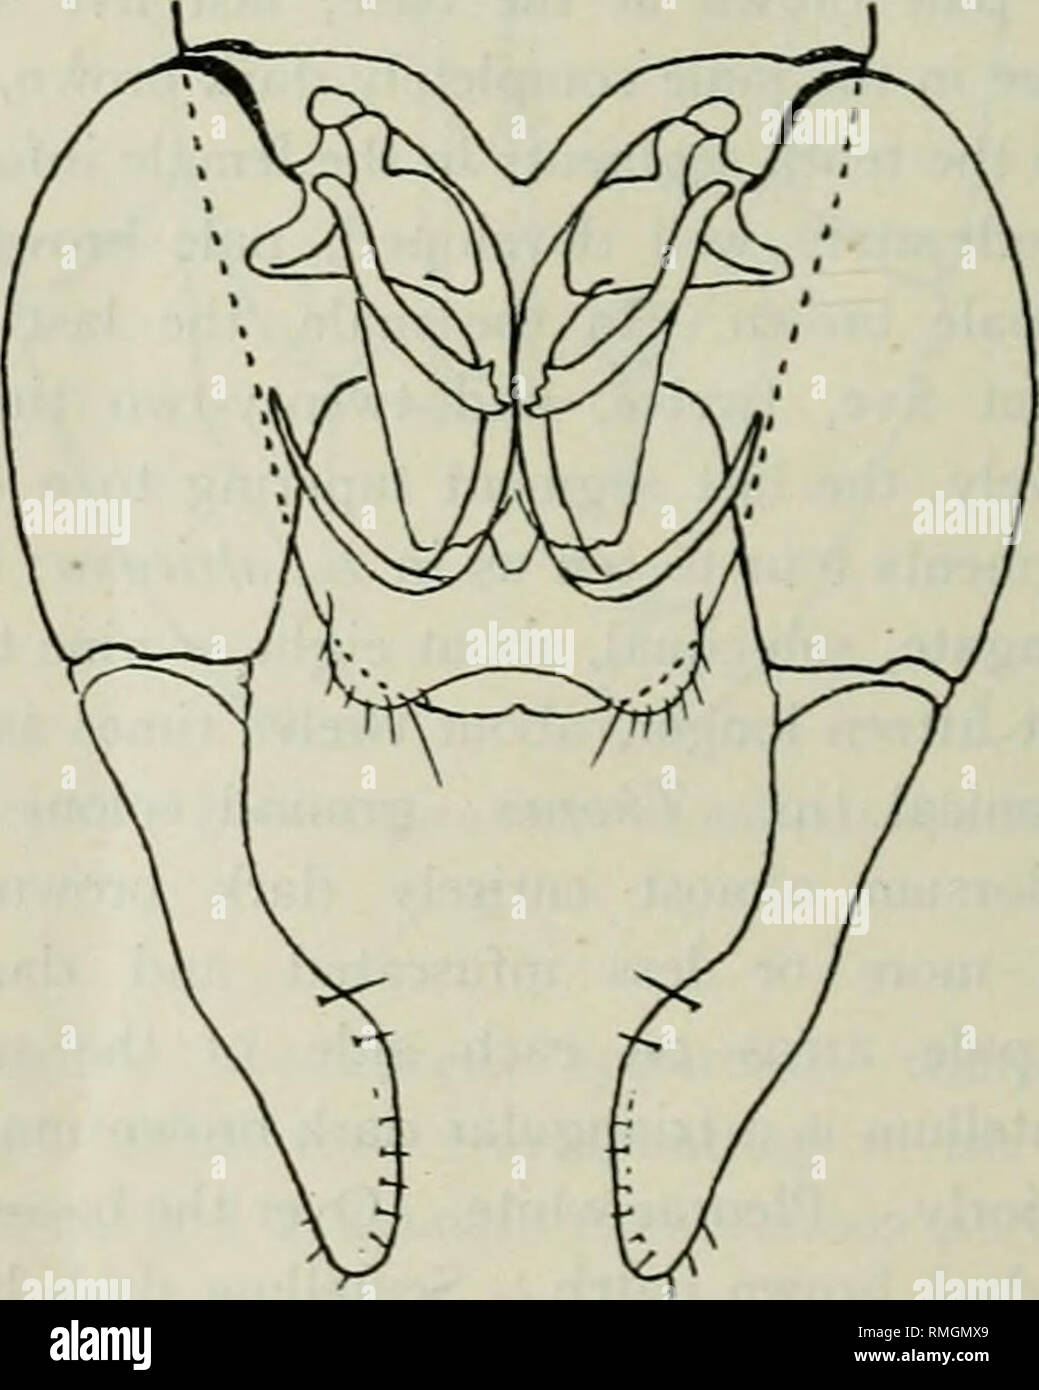 . Annals of tropical medicine and parasitology. Parasites. 352 on the fifth segments, however, less well developed, arrangement in the female as in E. africana, in the male only one pair present on all the legs. Claws as in E. africana. Abdomen white, with dark brown markings arranged as follows: small lateral patches on the first, fourth, and seventh segments, large dorso-lateral patches, reaching aJmost to the middle line dorsally, on the second, third, fifth and sixth segments. Lateral hair tufts on the first segment not so prominent as in E. africana. Spermathecae similar to those of E. af Stock Photo